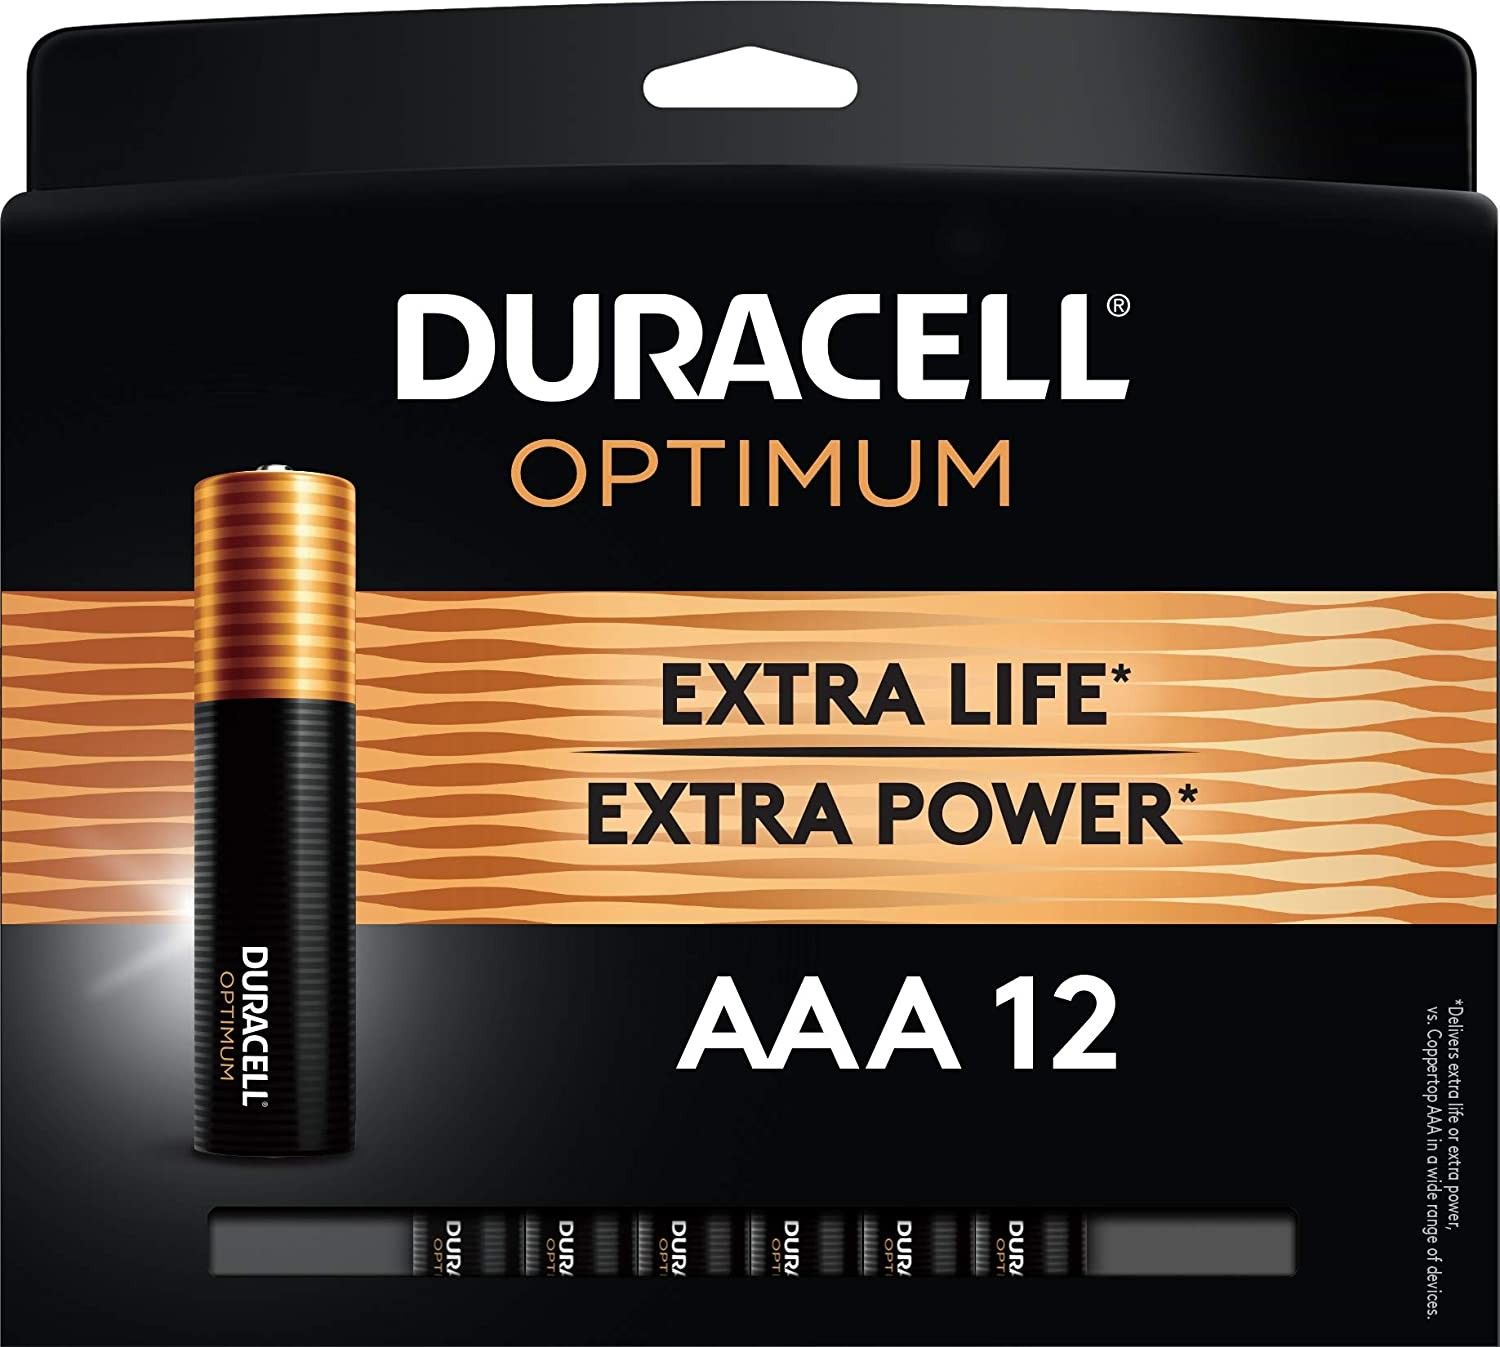 Optimum Duracell Batteries Can Leak And Don T Last Class Action Lawsuit Says Top Class Actions